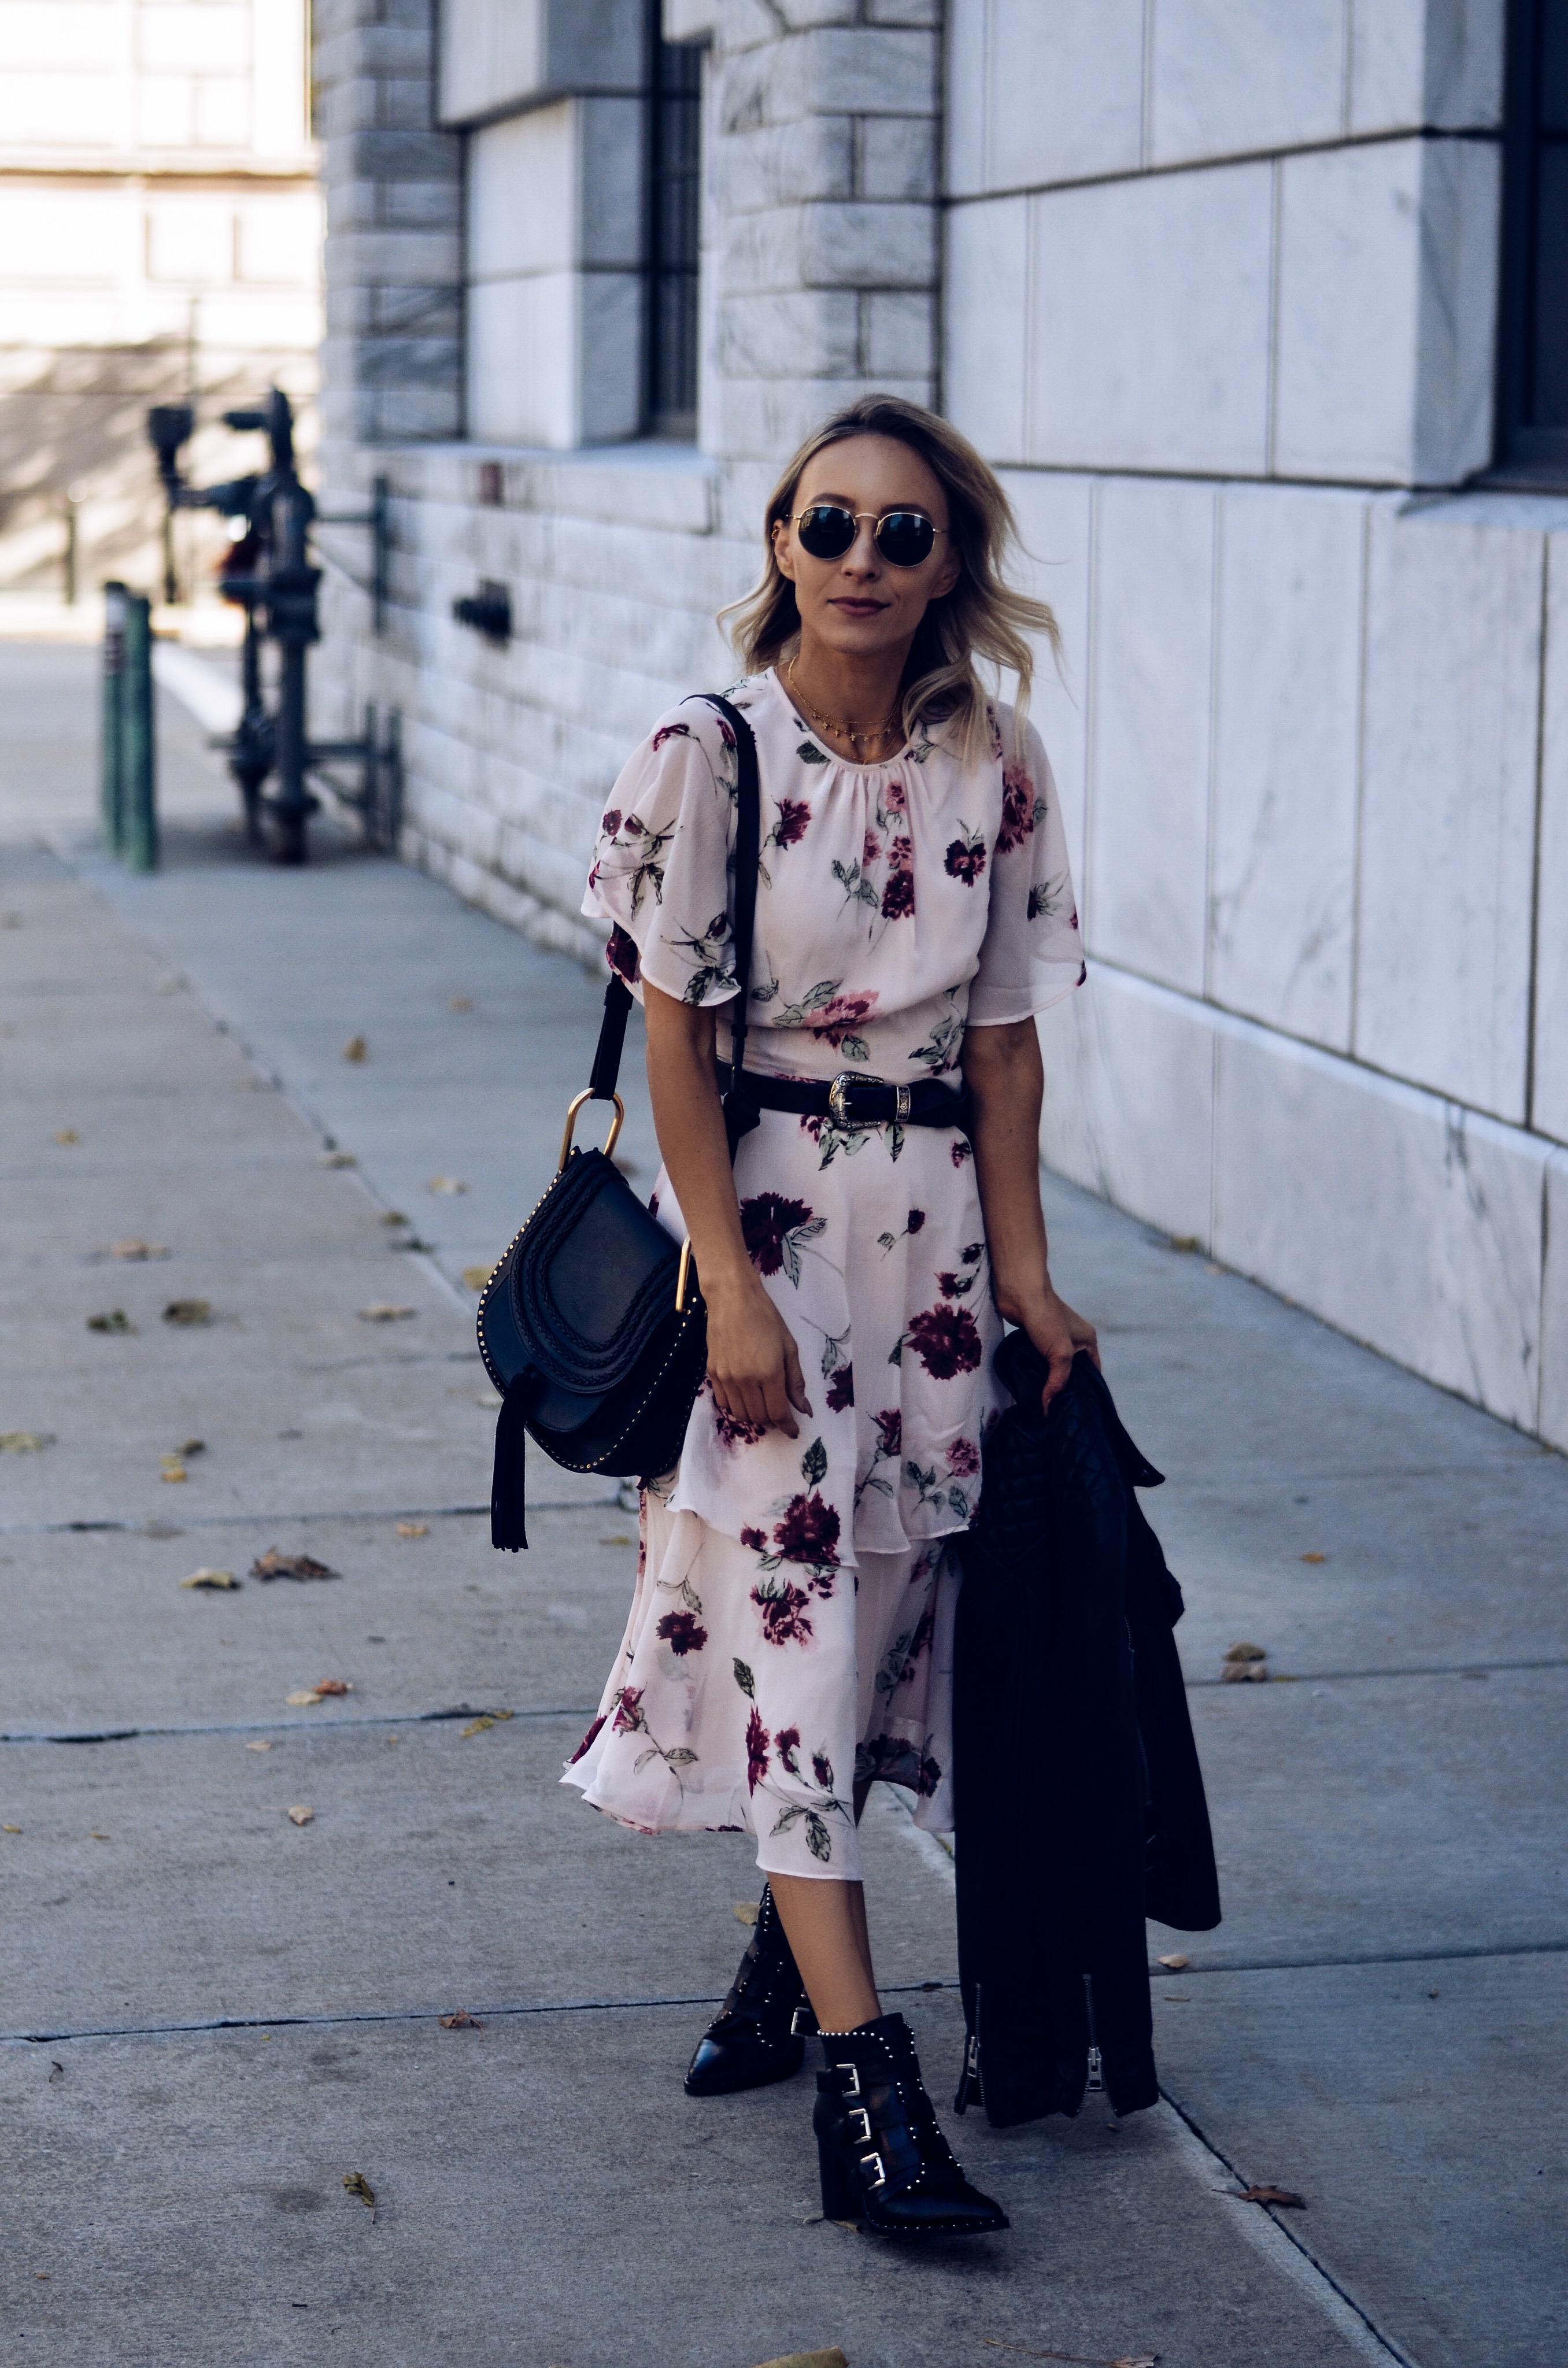 Floral Dress with a Leather Jacket - Fall Style | Blame it on Barneys